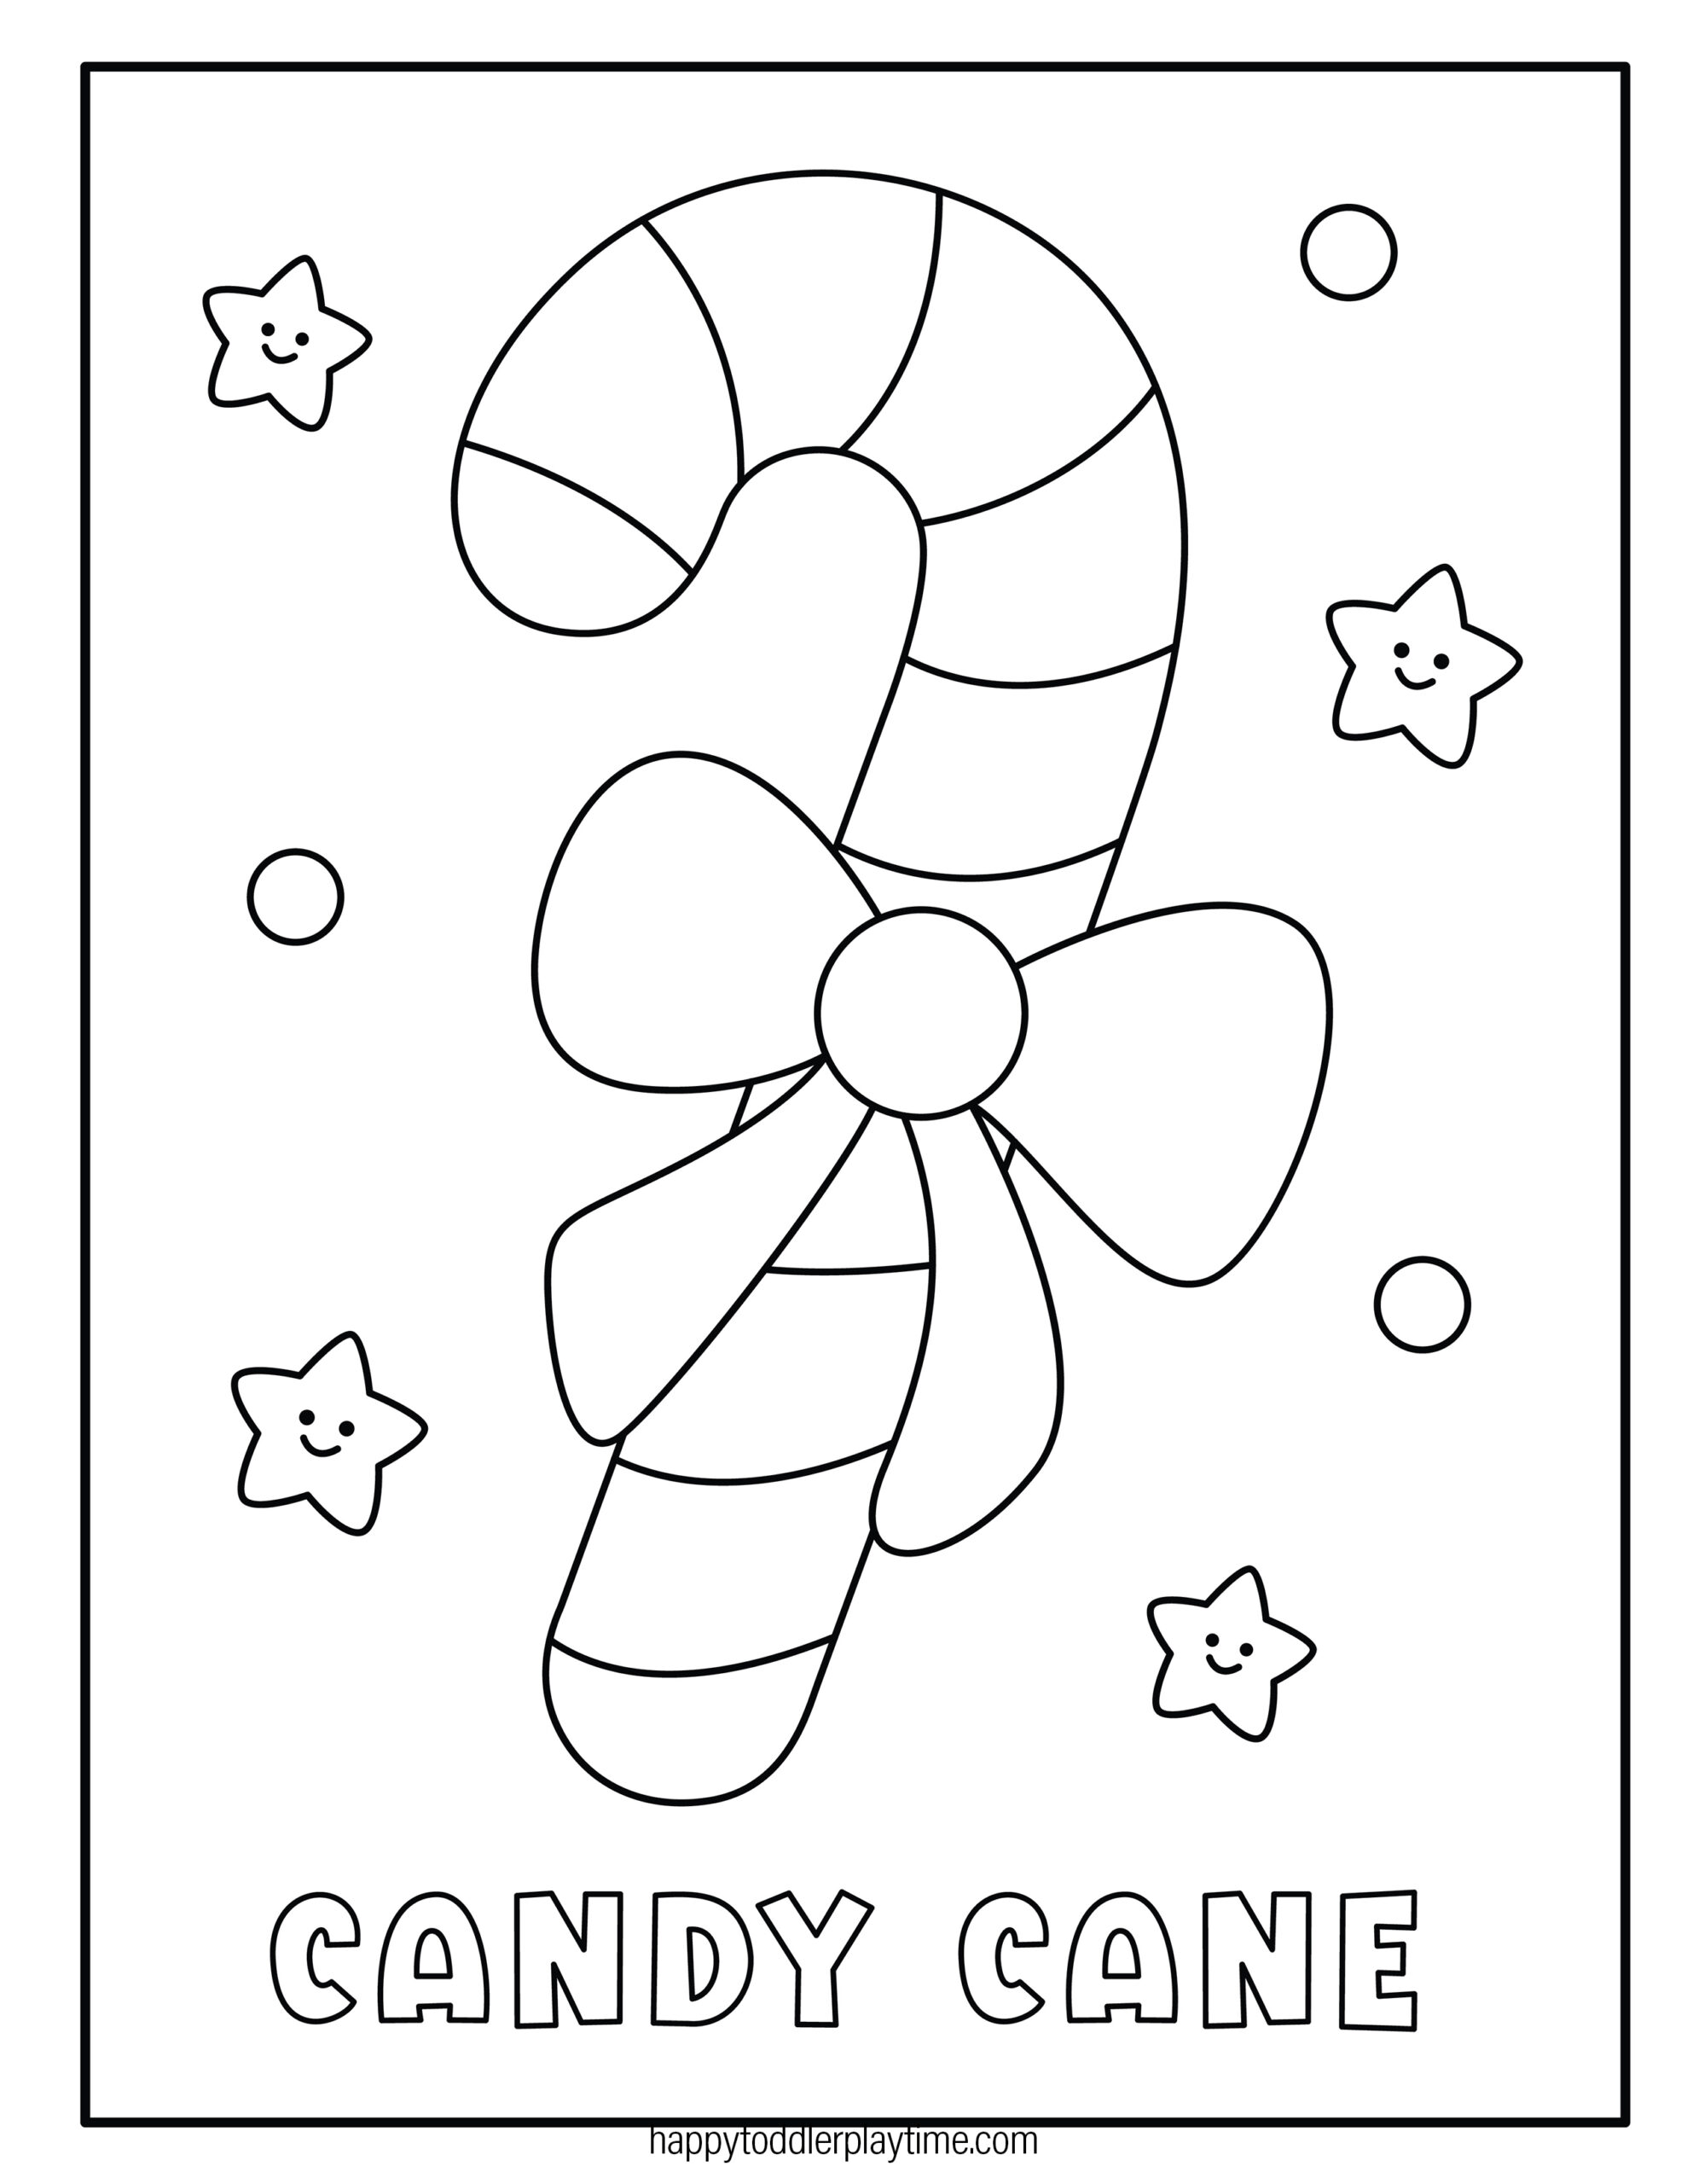 Free printable candy cane coloring pages for kids